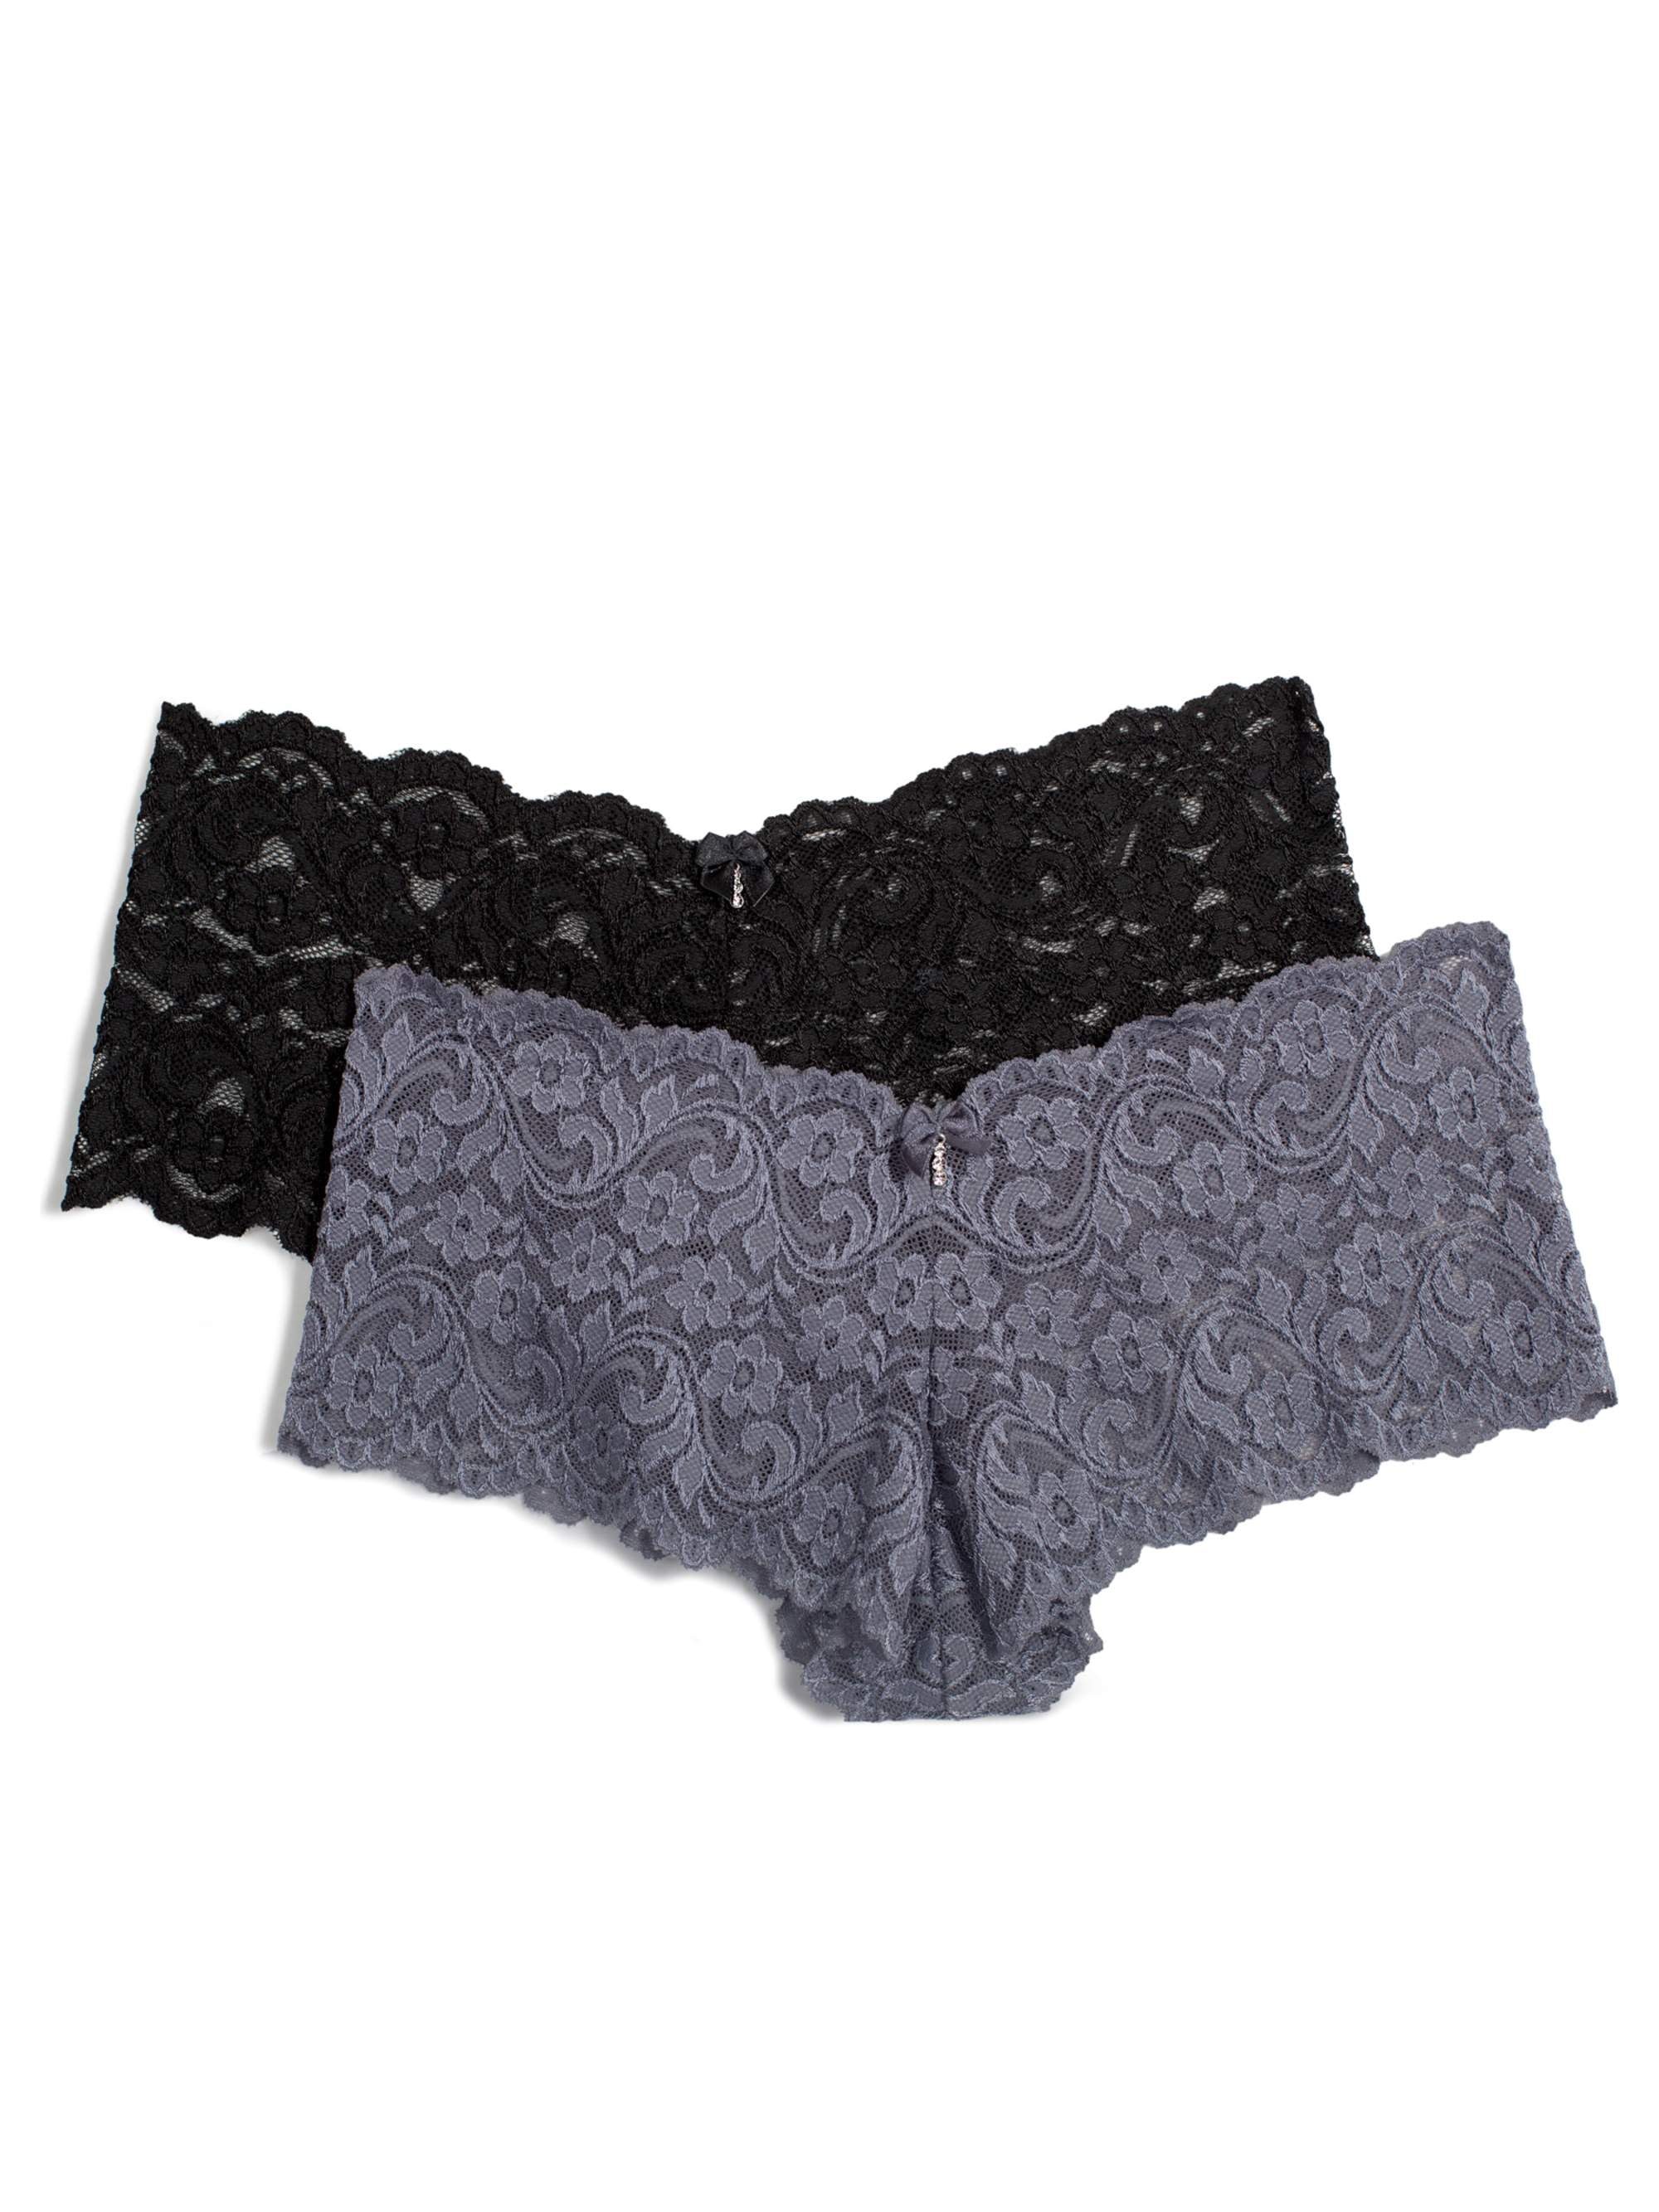  Smart & Sexy Womens Signature Lace Cheeky Panty 2 Pack